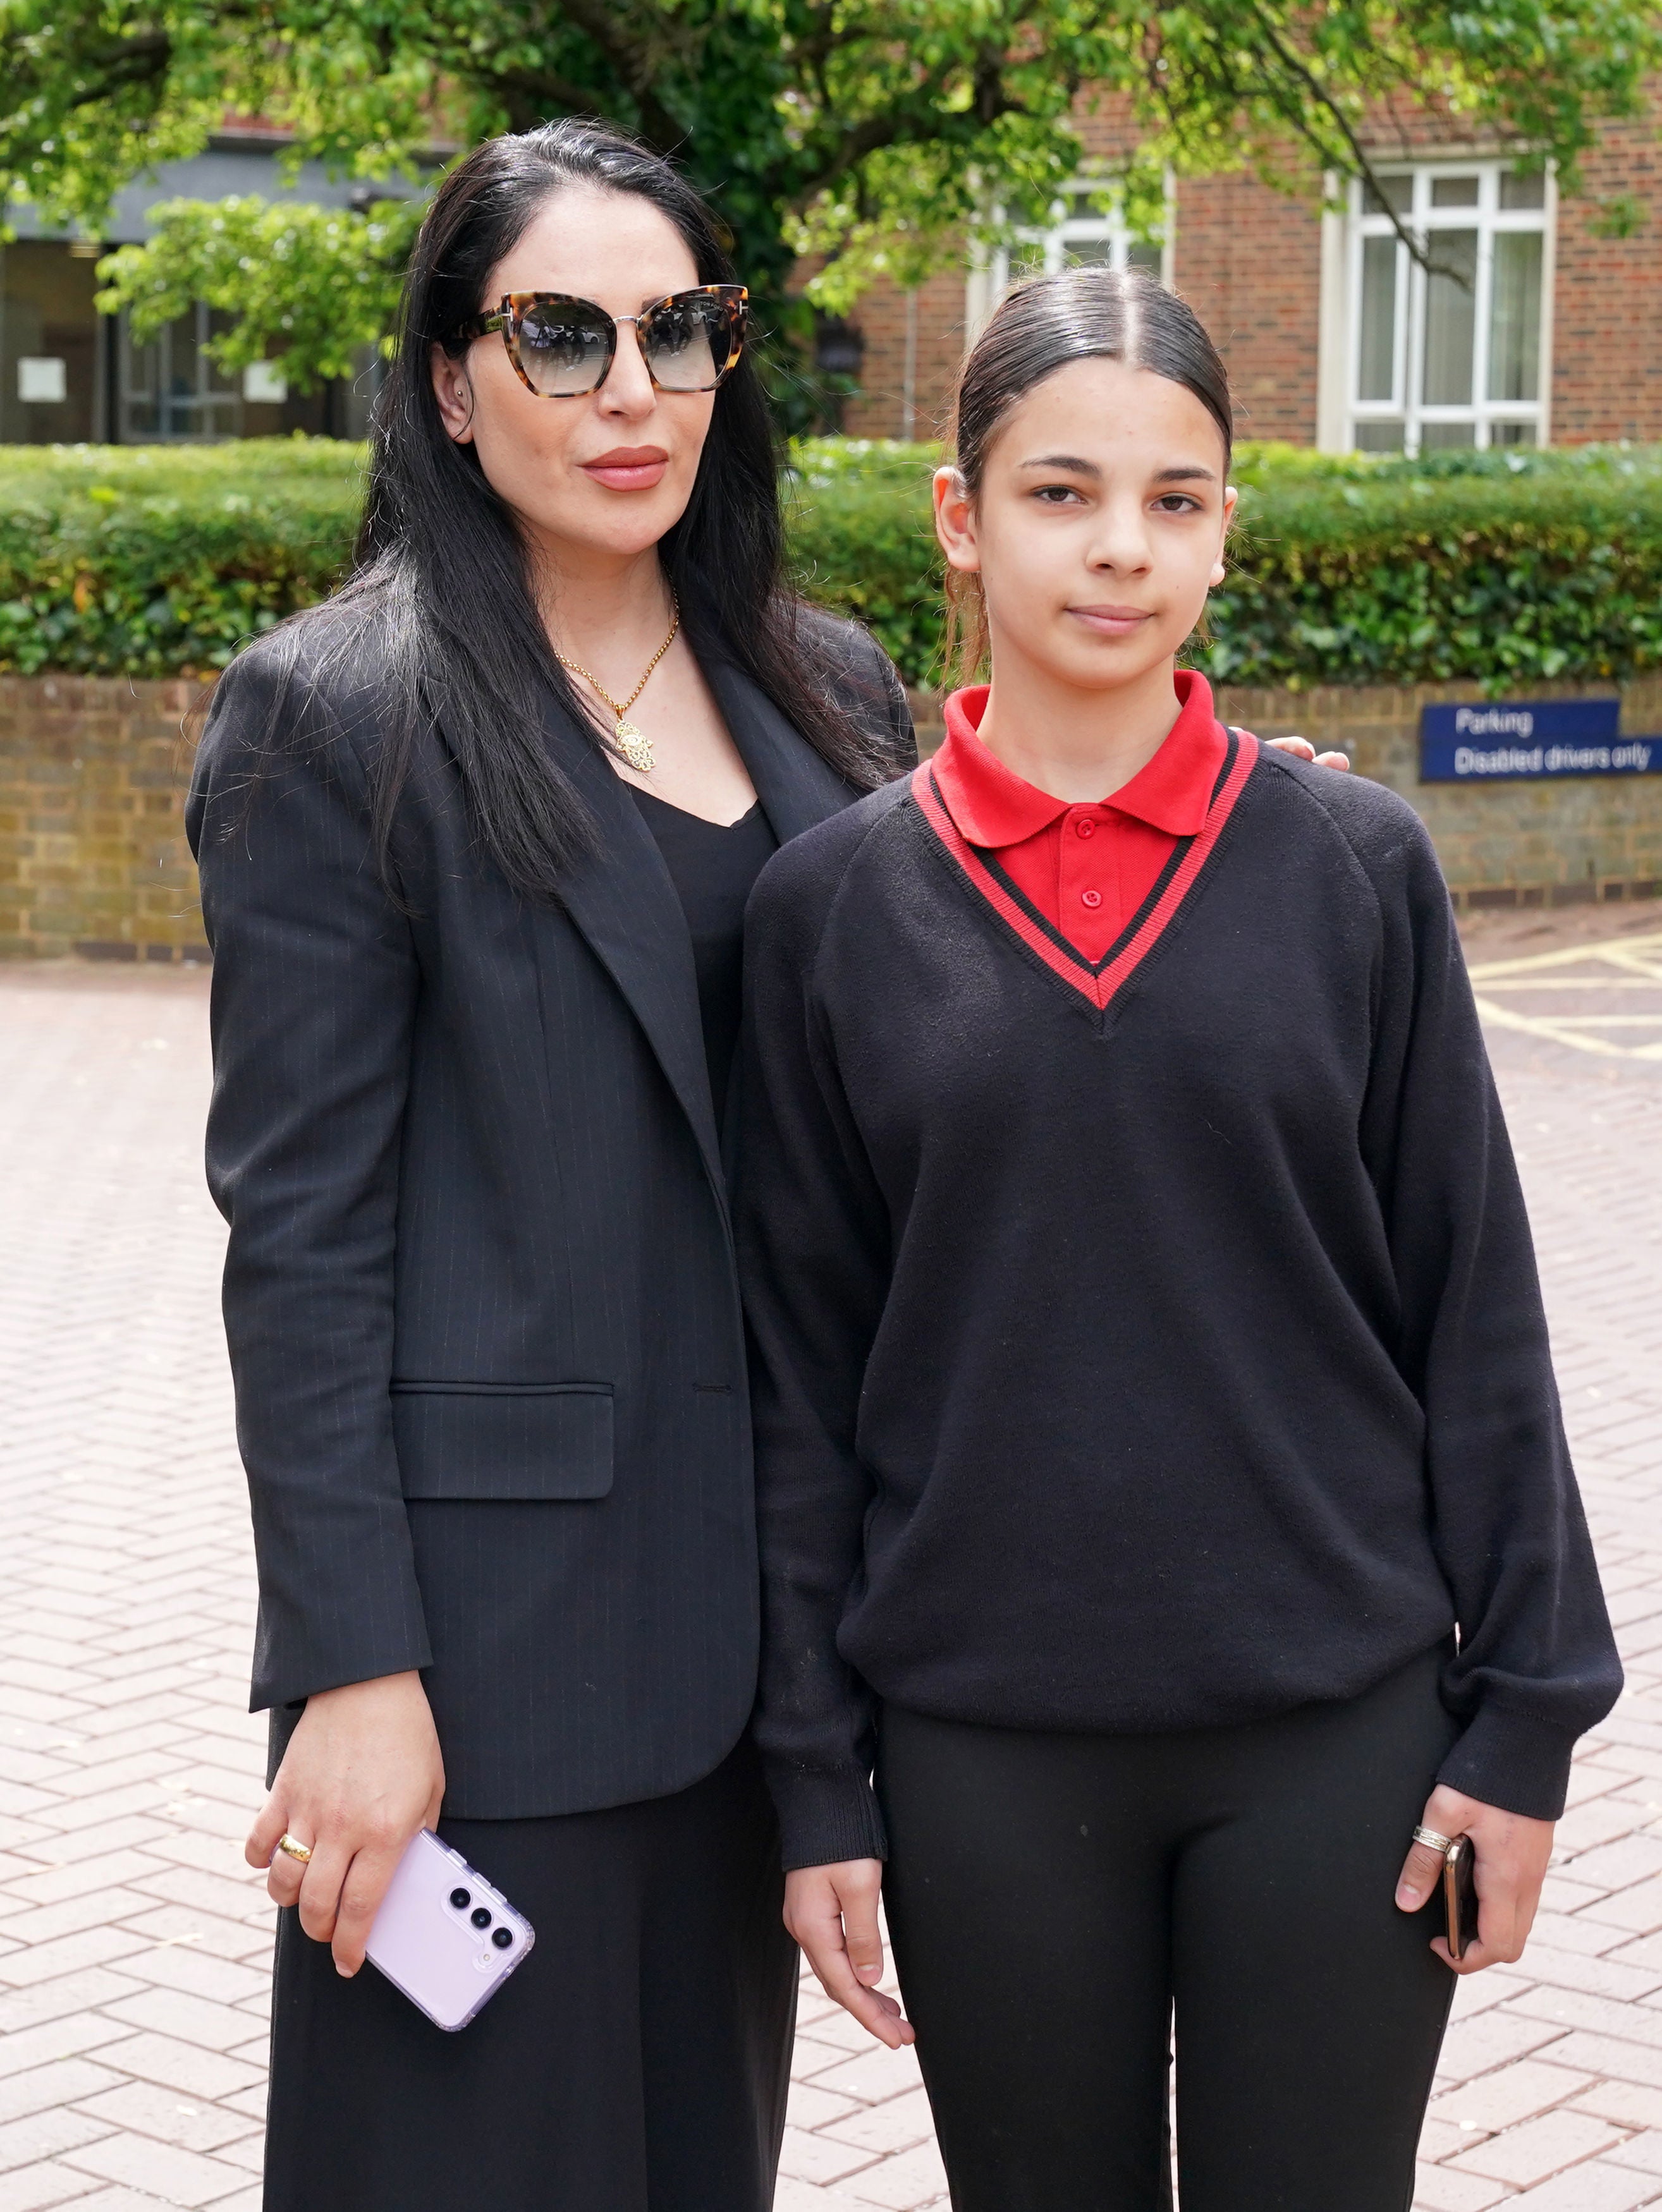 Maya Kodsi, 37, (left) sister of Yagmur Ozden, 33, and her daughter Melek Ozden, 13 outside Isleworth Crown Court